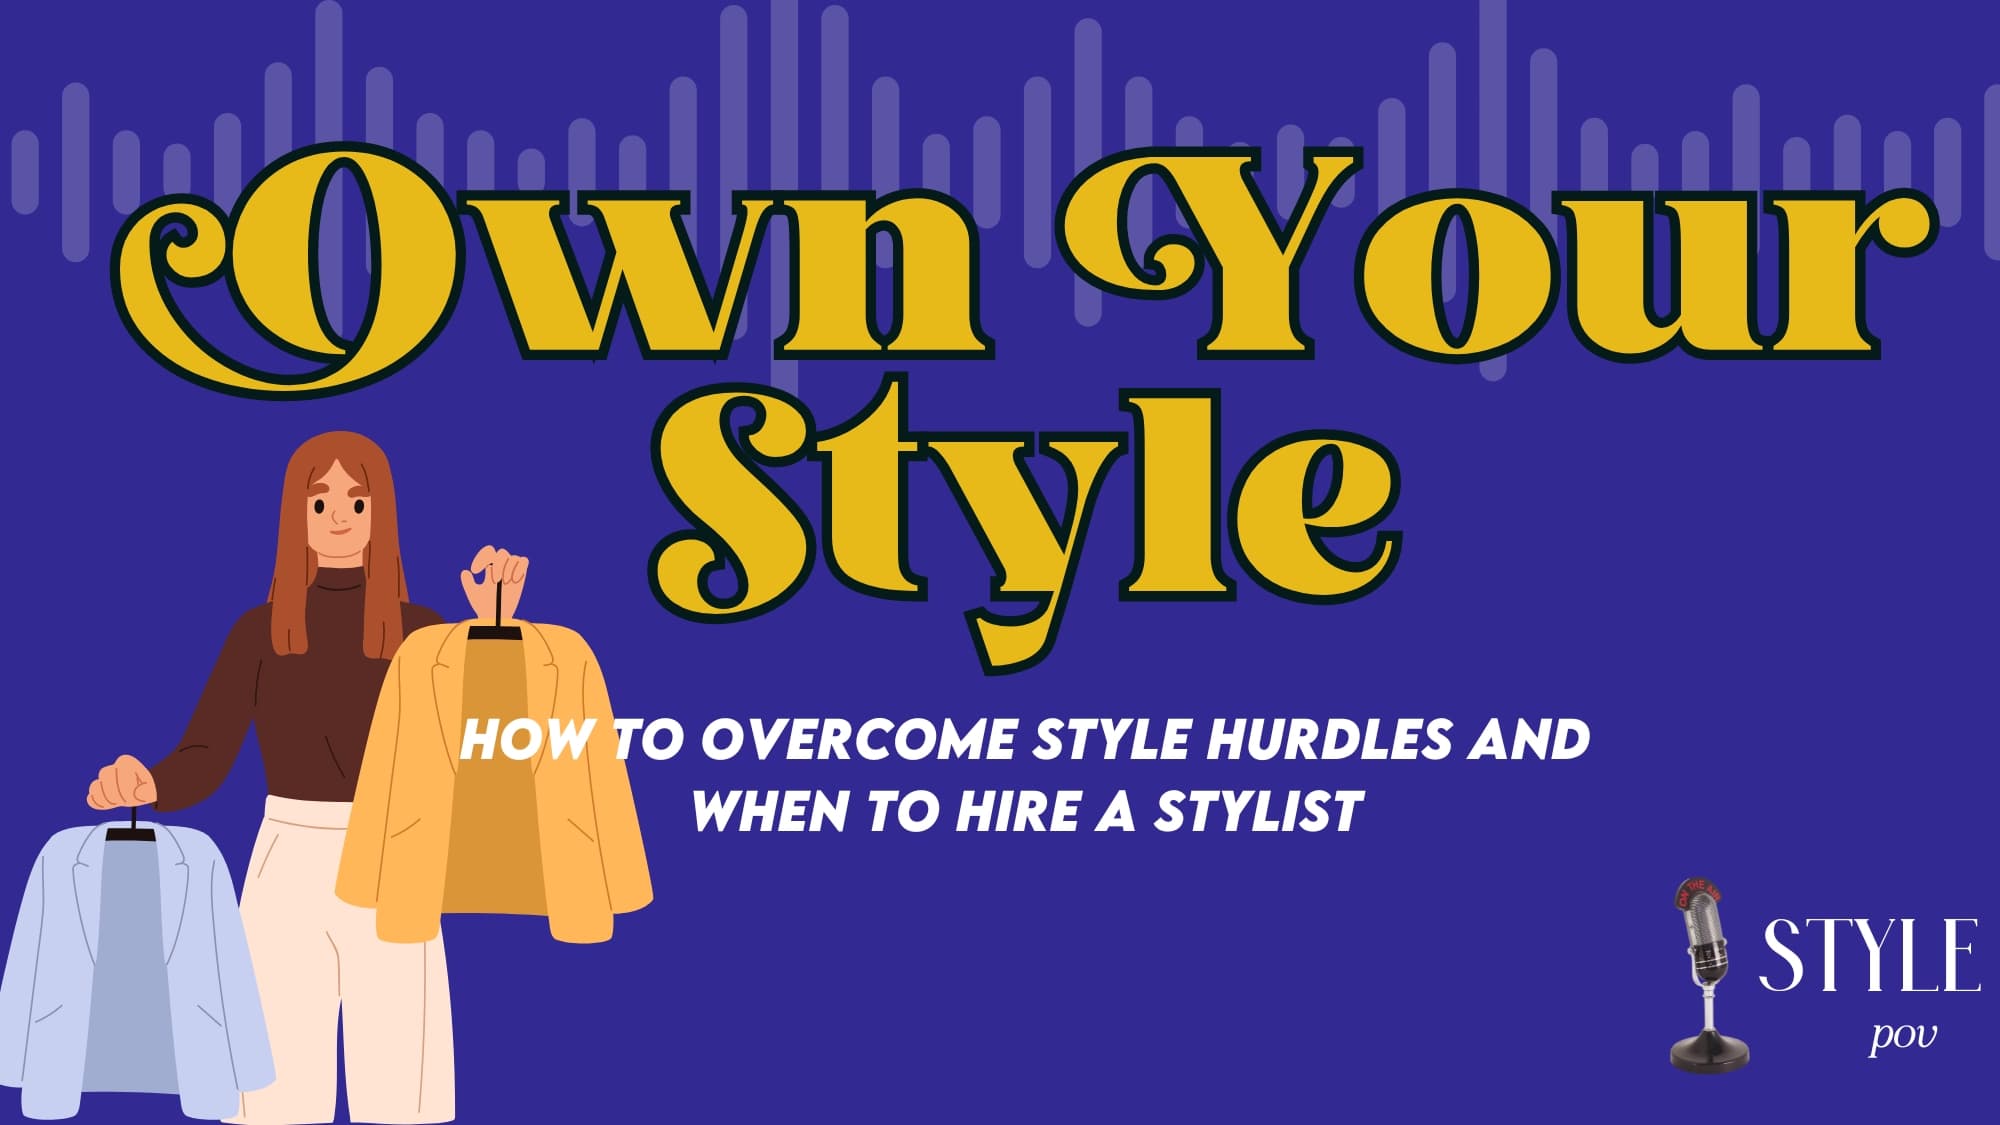 own your style how to overcome style hurdles and when to hire a stylist with a woman holding up to jackets